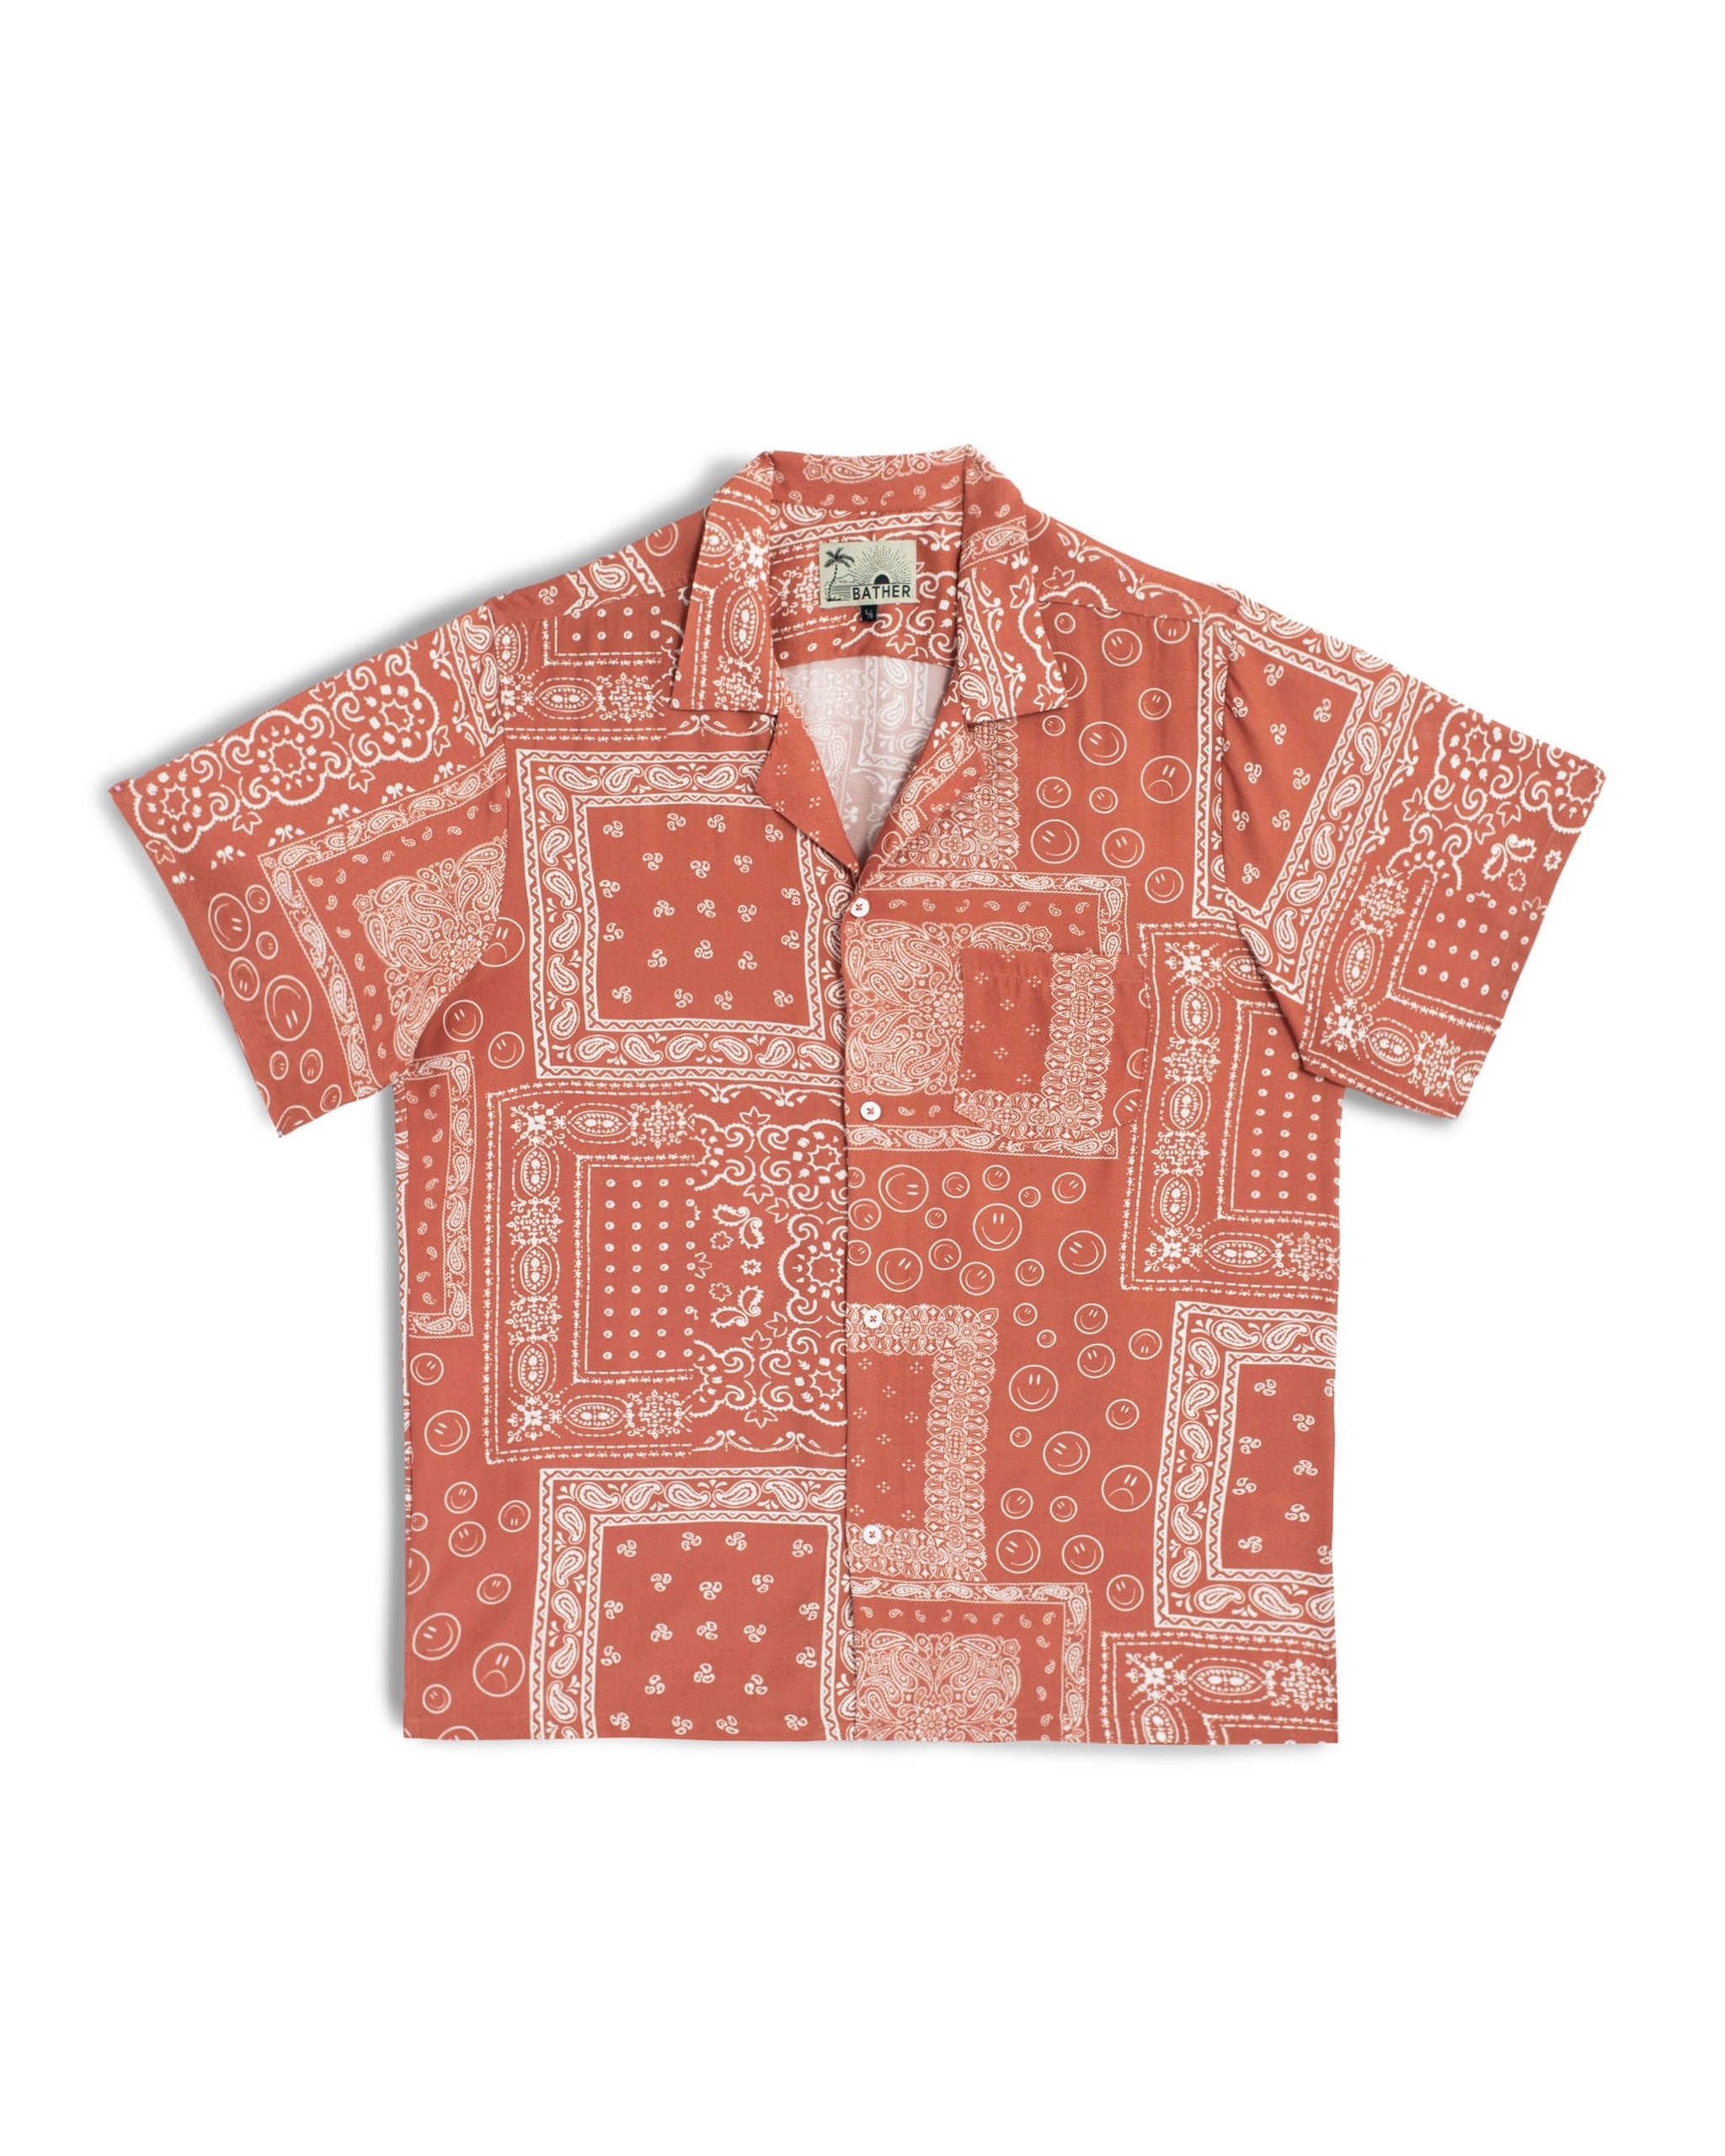 A terracotta red camp shirt with an all-over bandana print